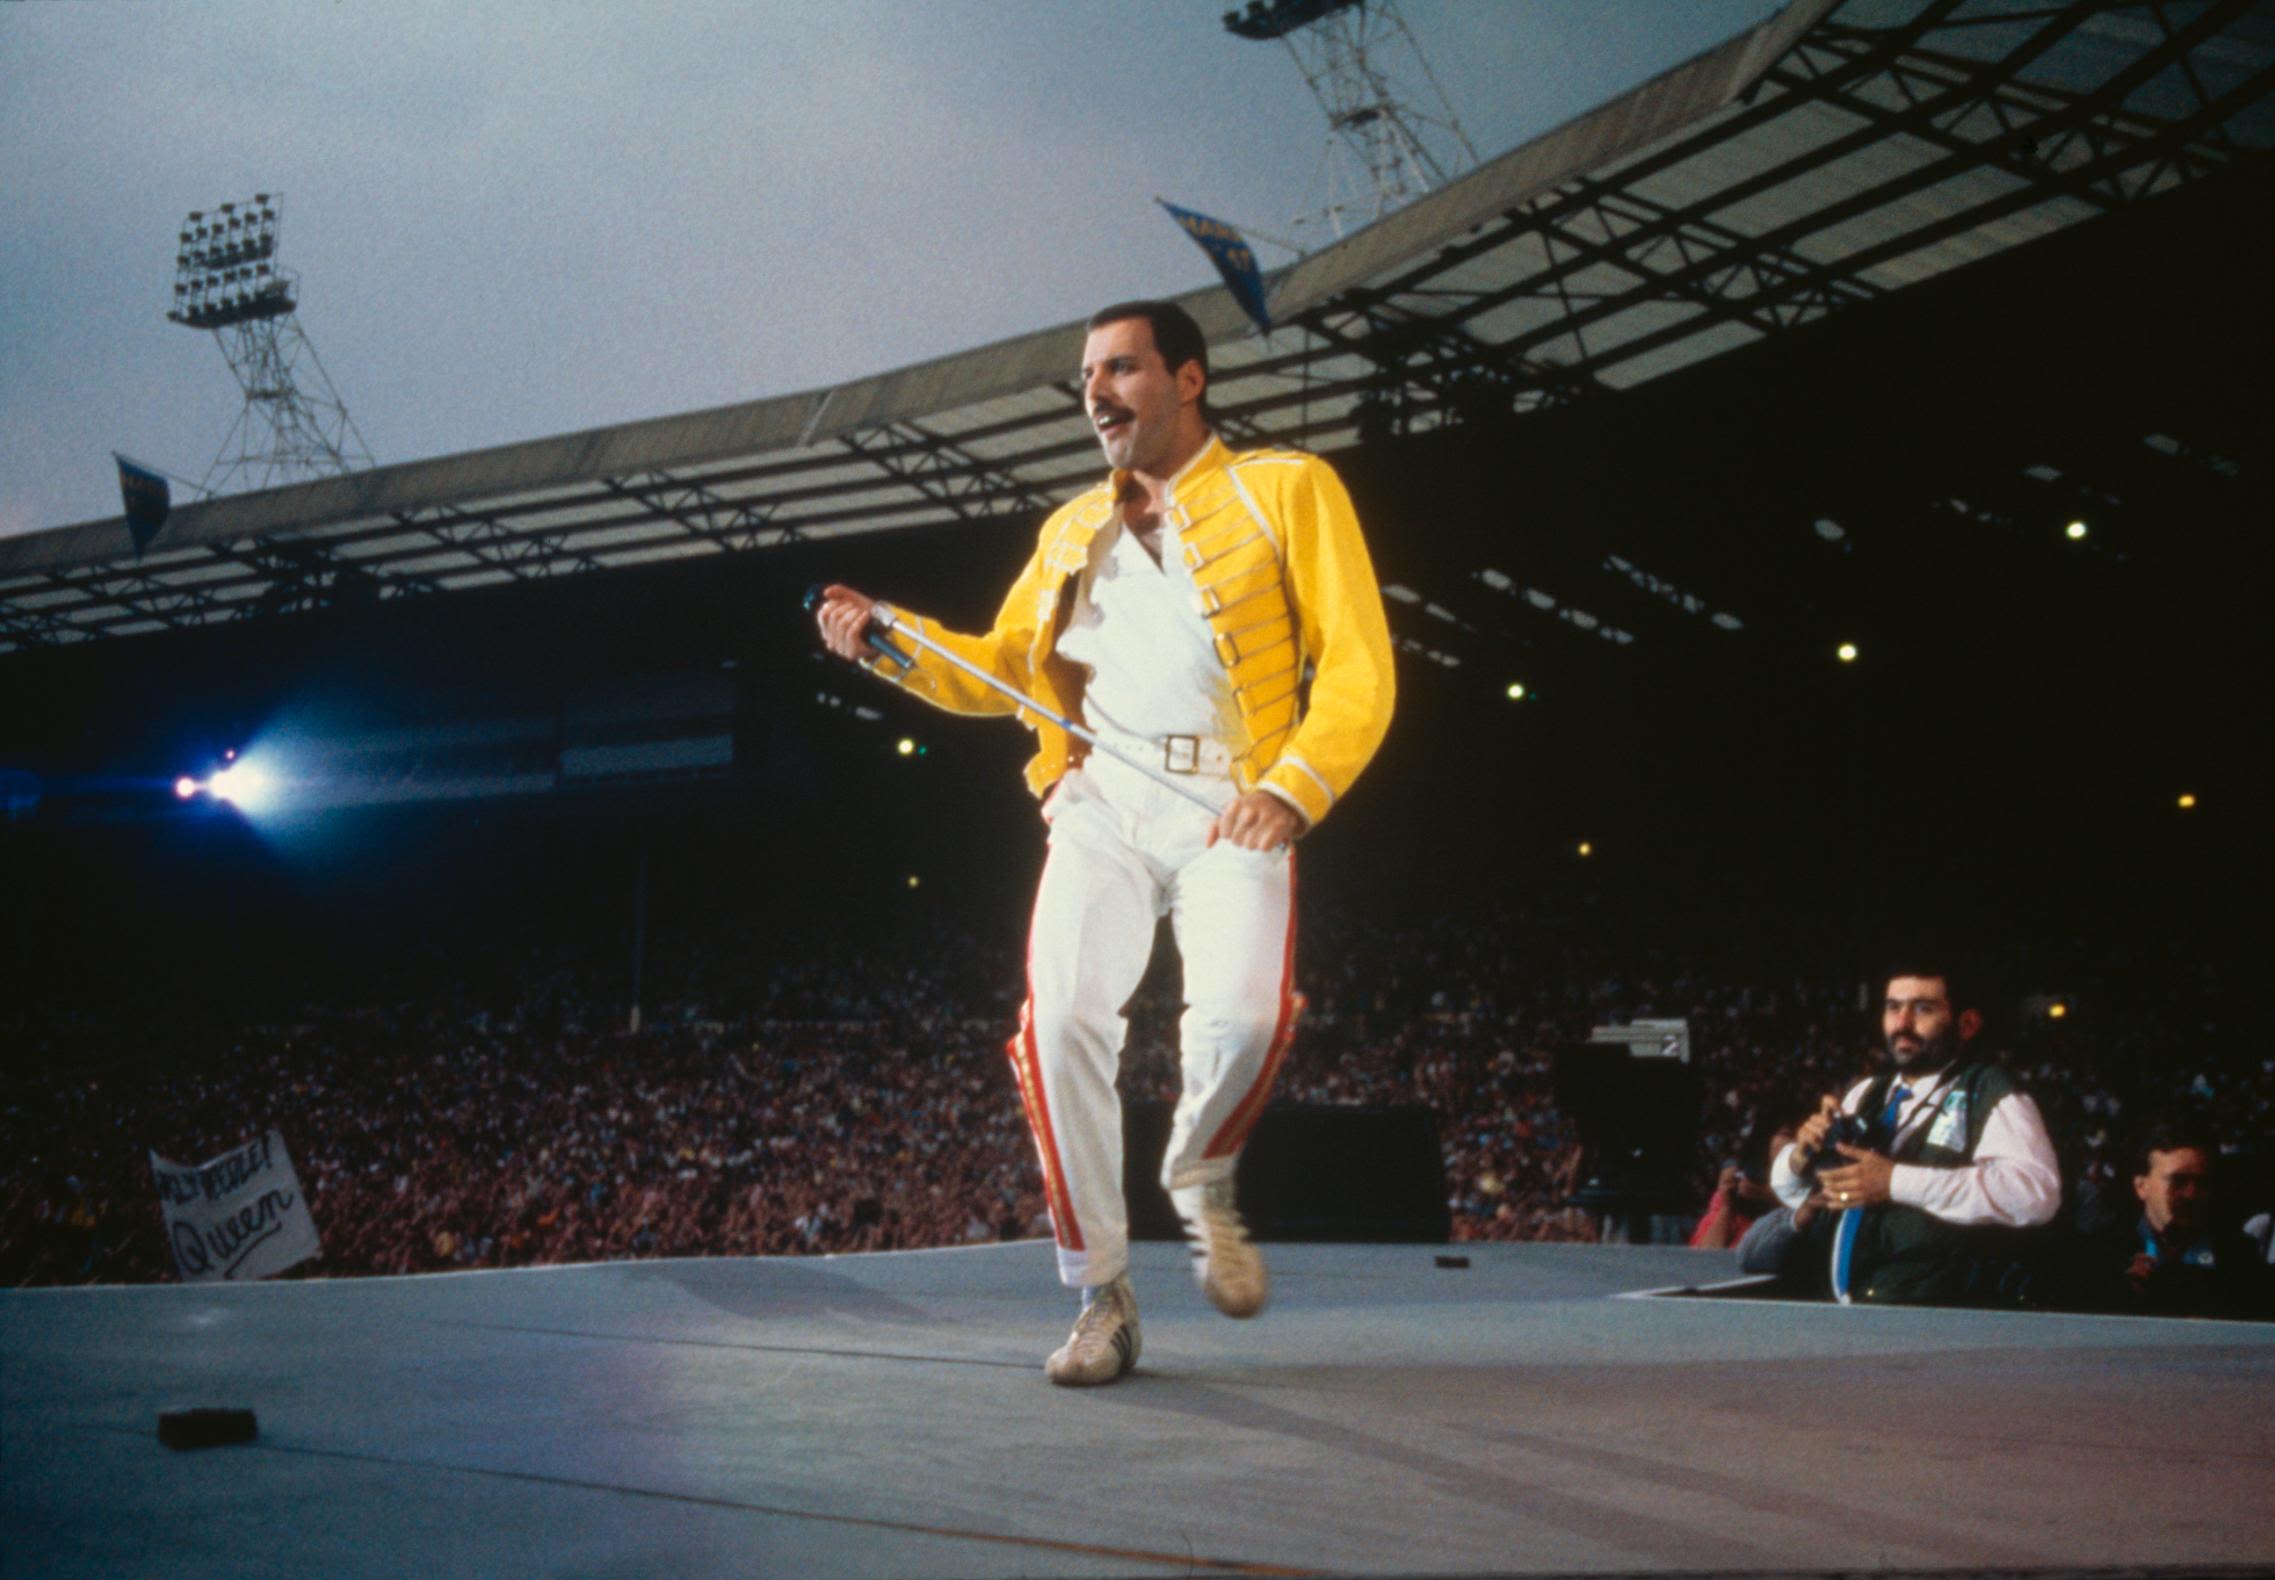 Remember when Freddie Mercury wore his yellow jacket at Wembley?